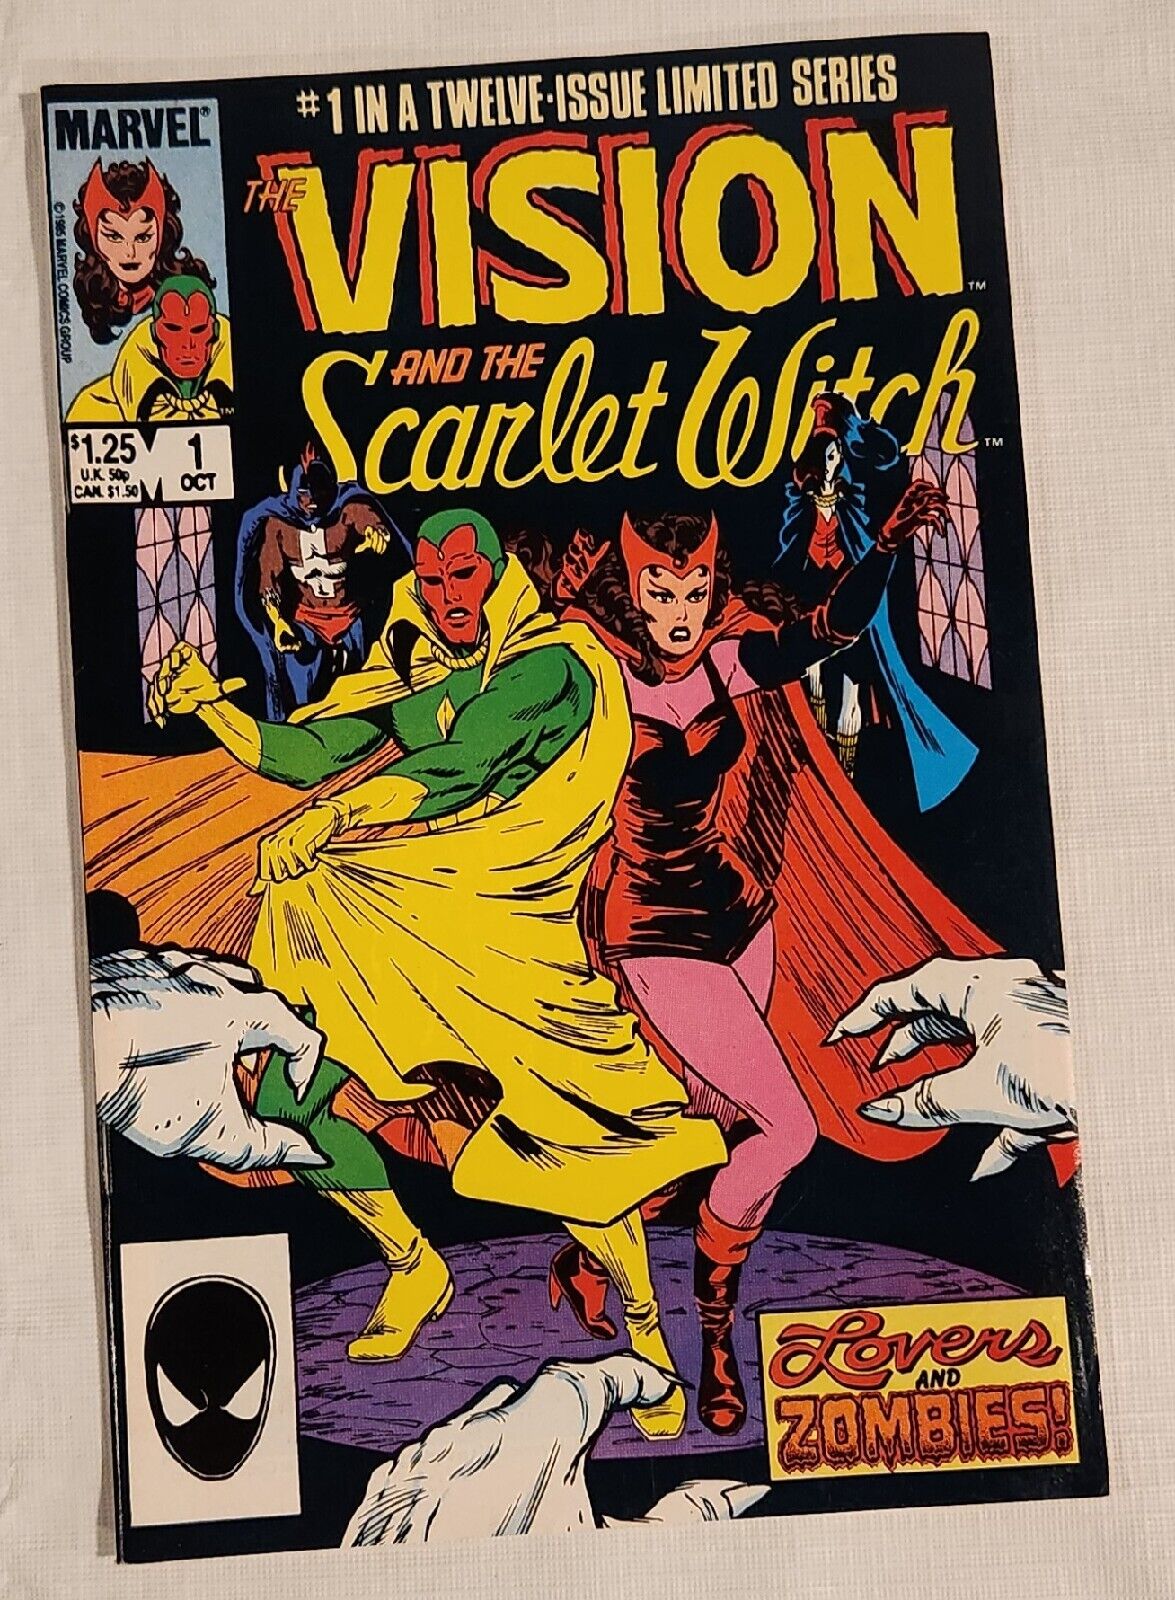 VISION and THE SCARLET WITCH #1 HIGH GRADE MARVEL COMICS 1985